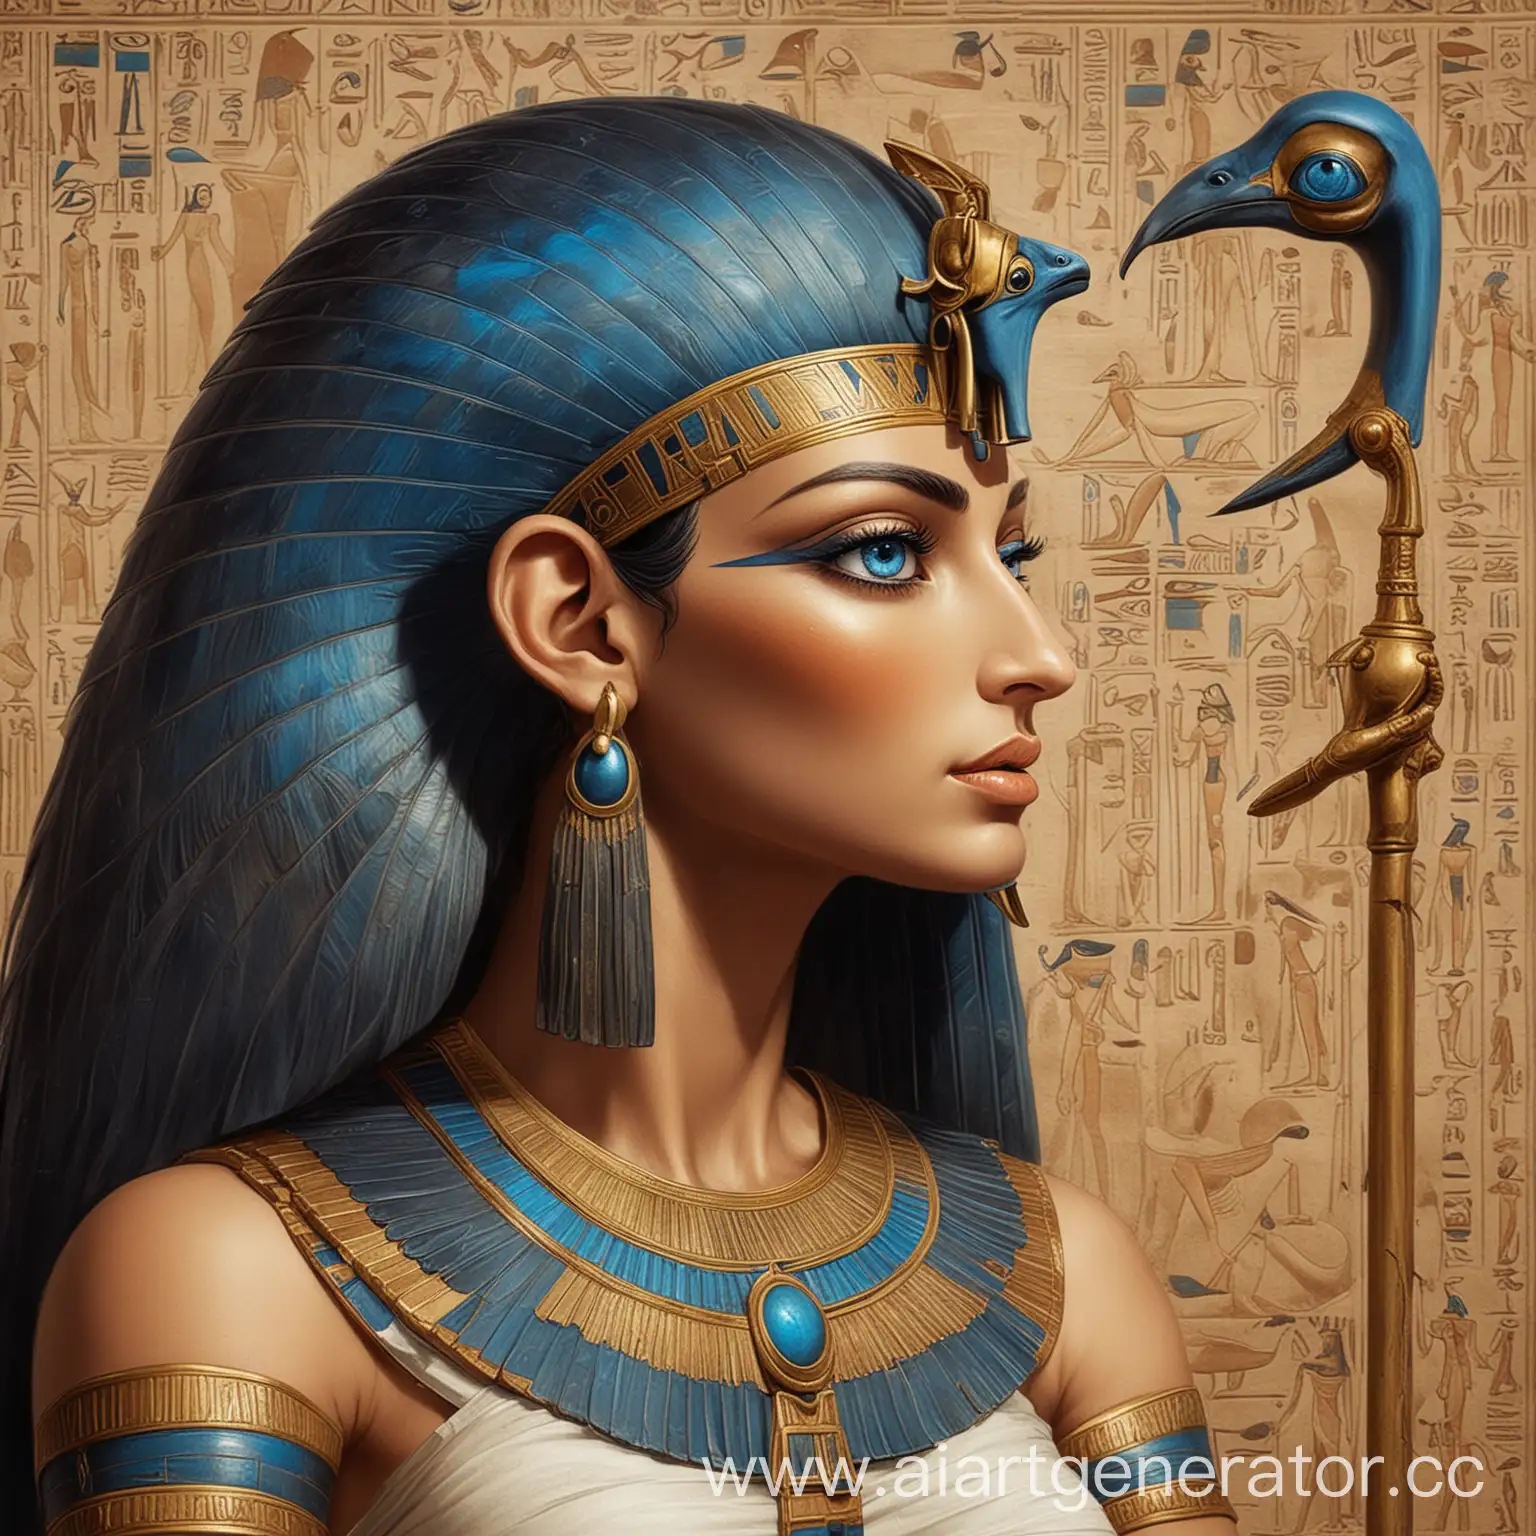 Female-Horus-with-Blue-Eyes-and-Favorite-Egyptian-God-Nearby